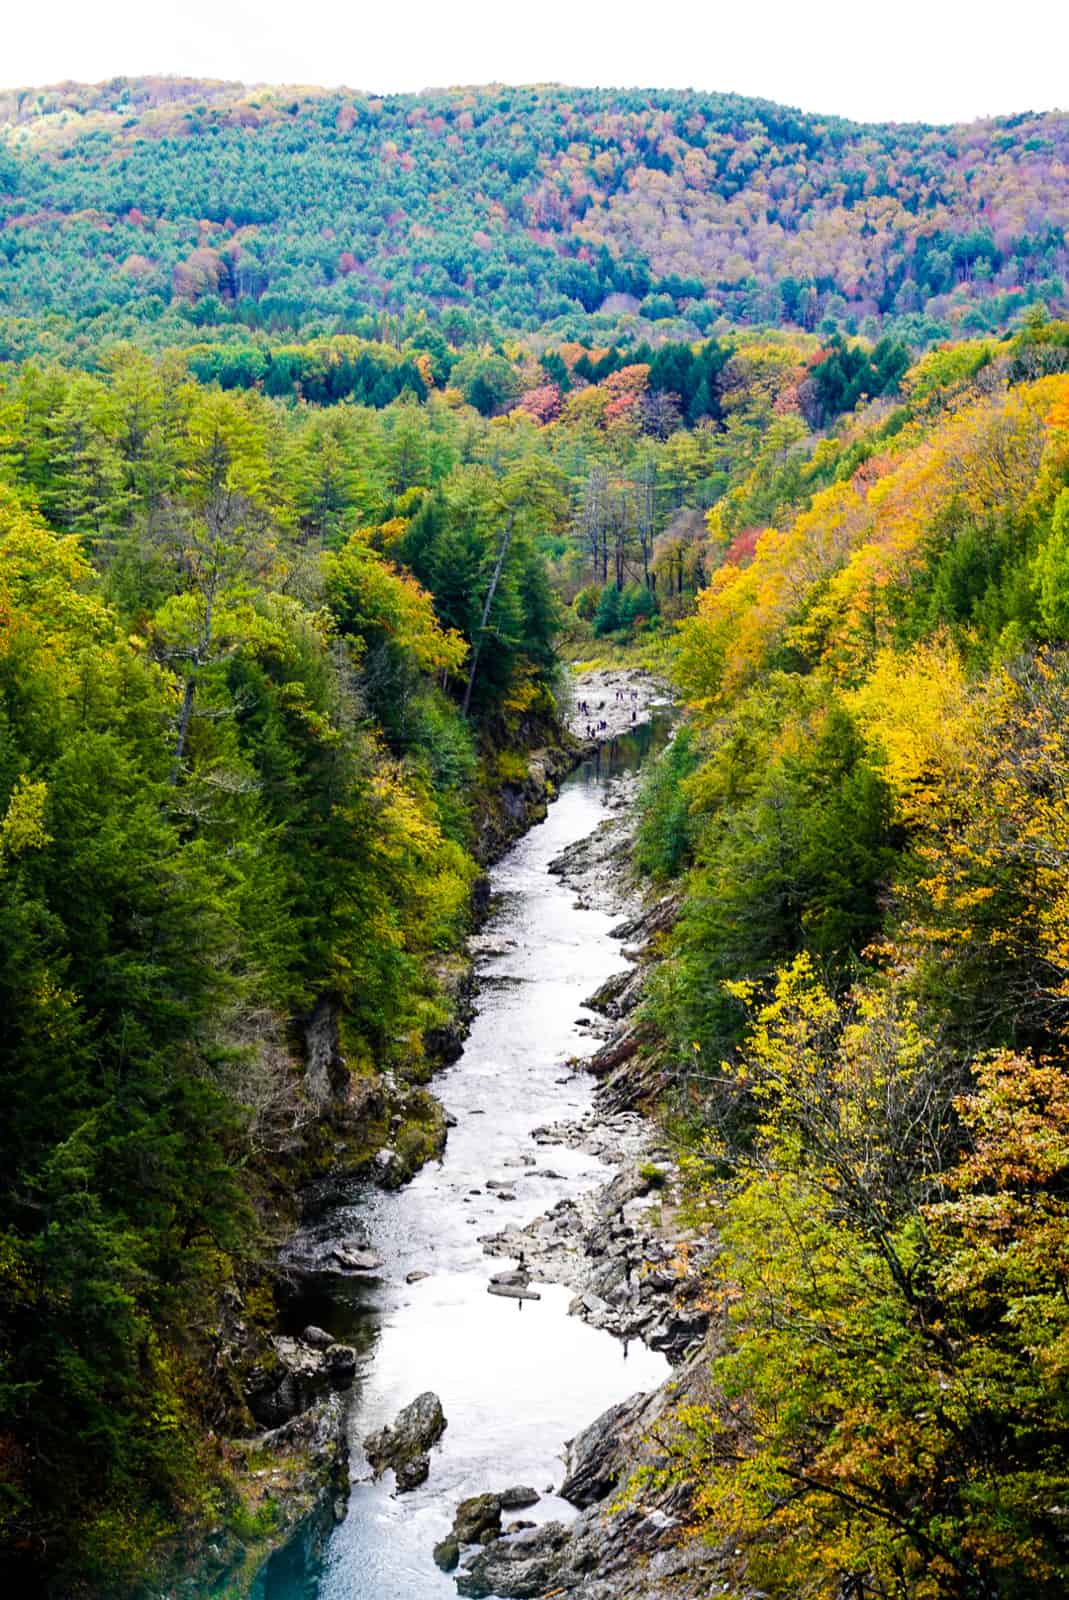 View from the suspension bridge overlooking Quechee Gorge